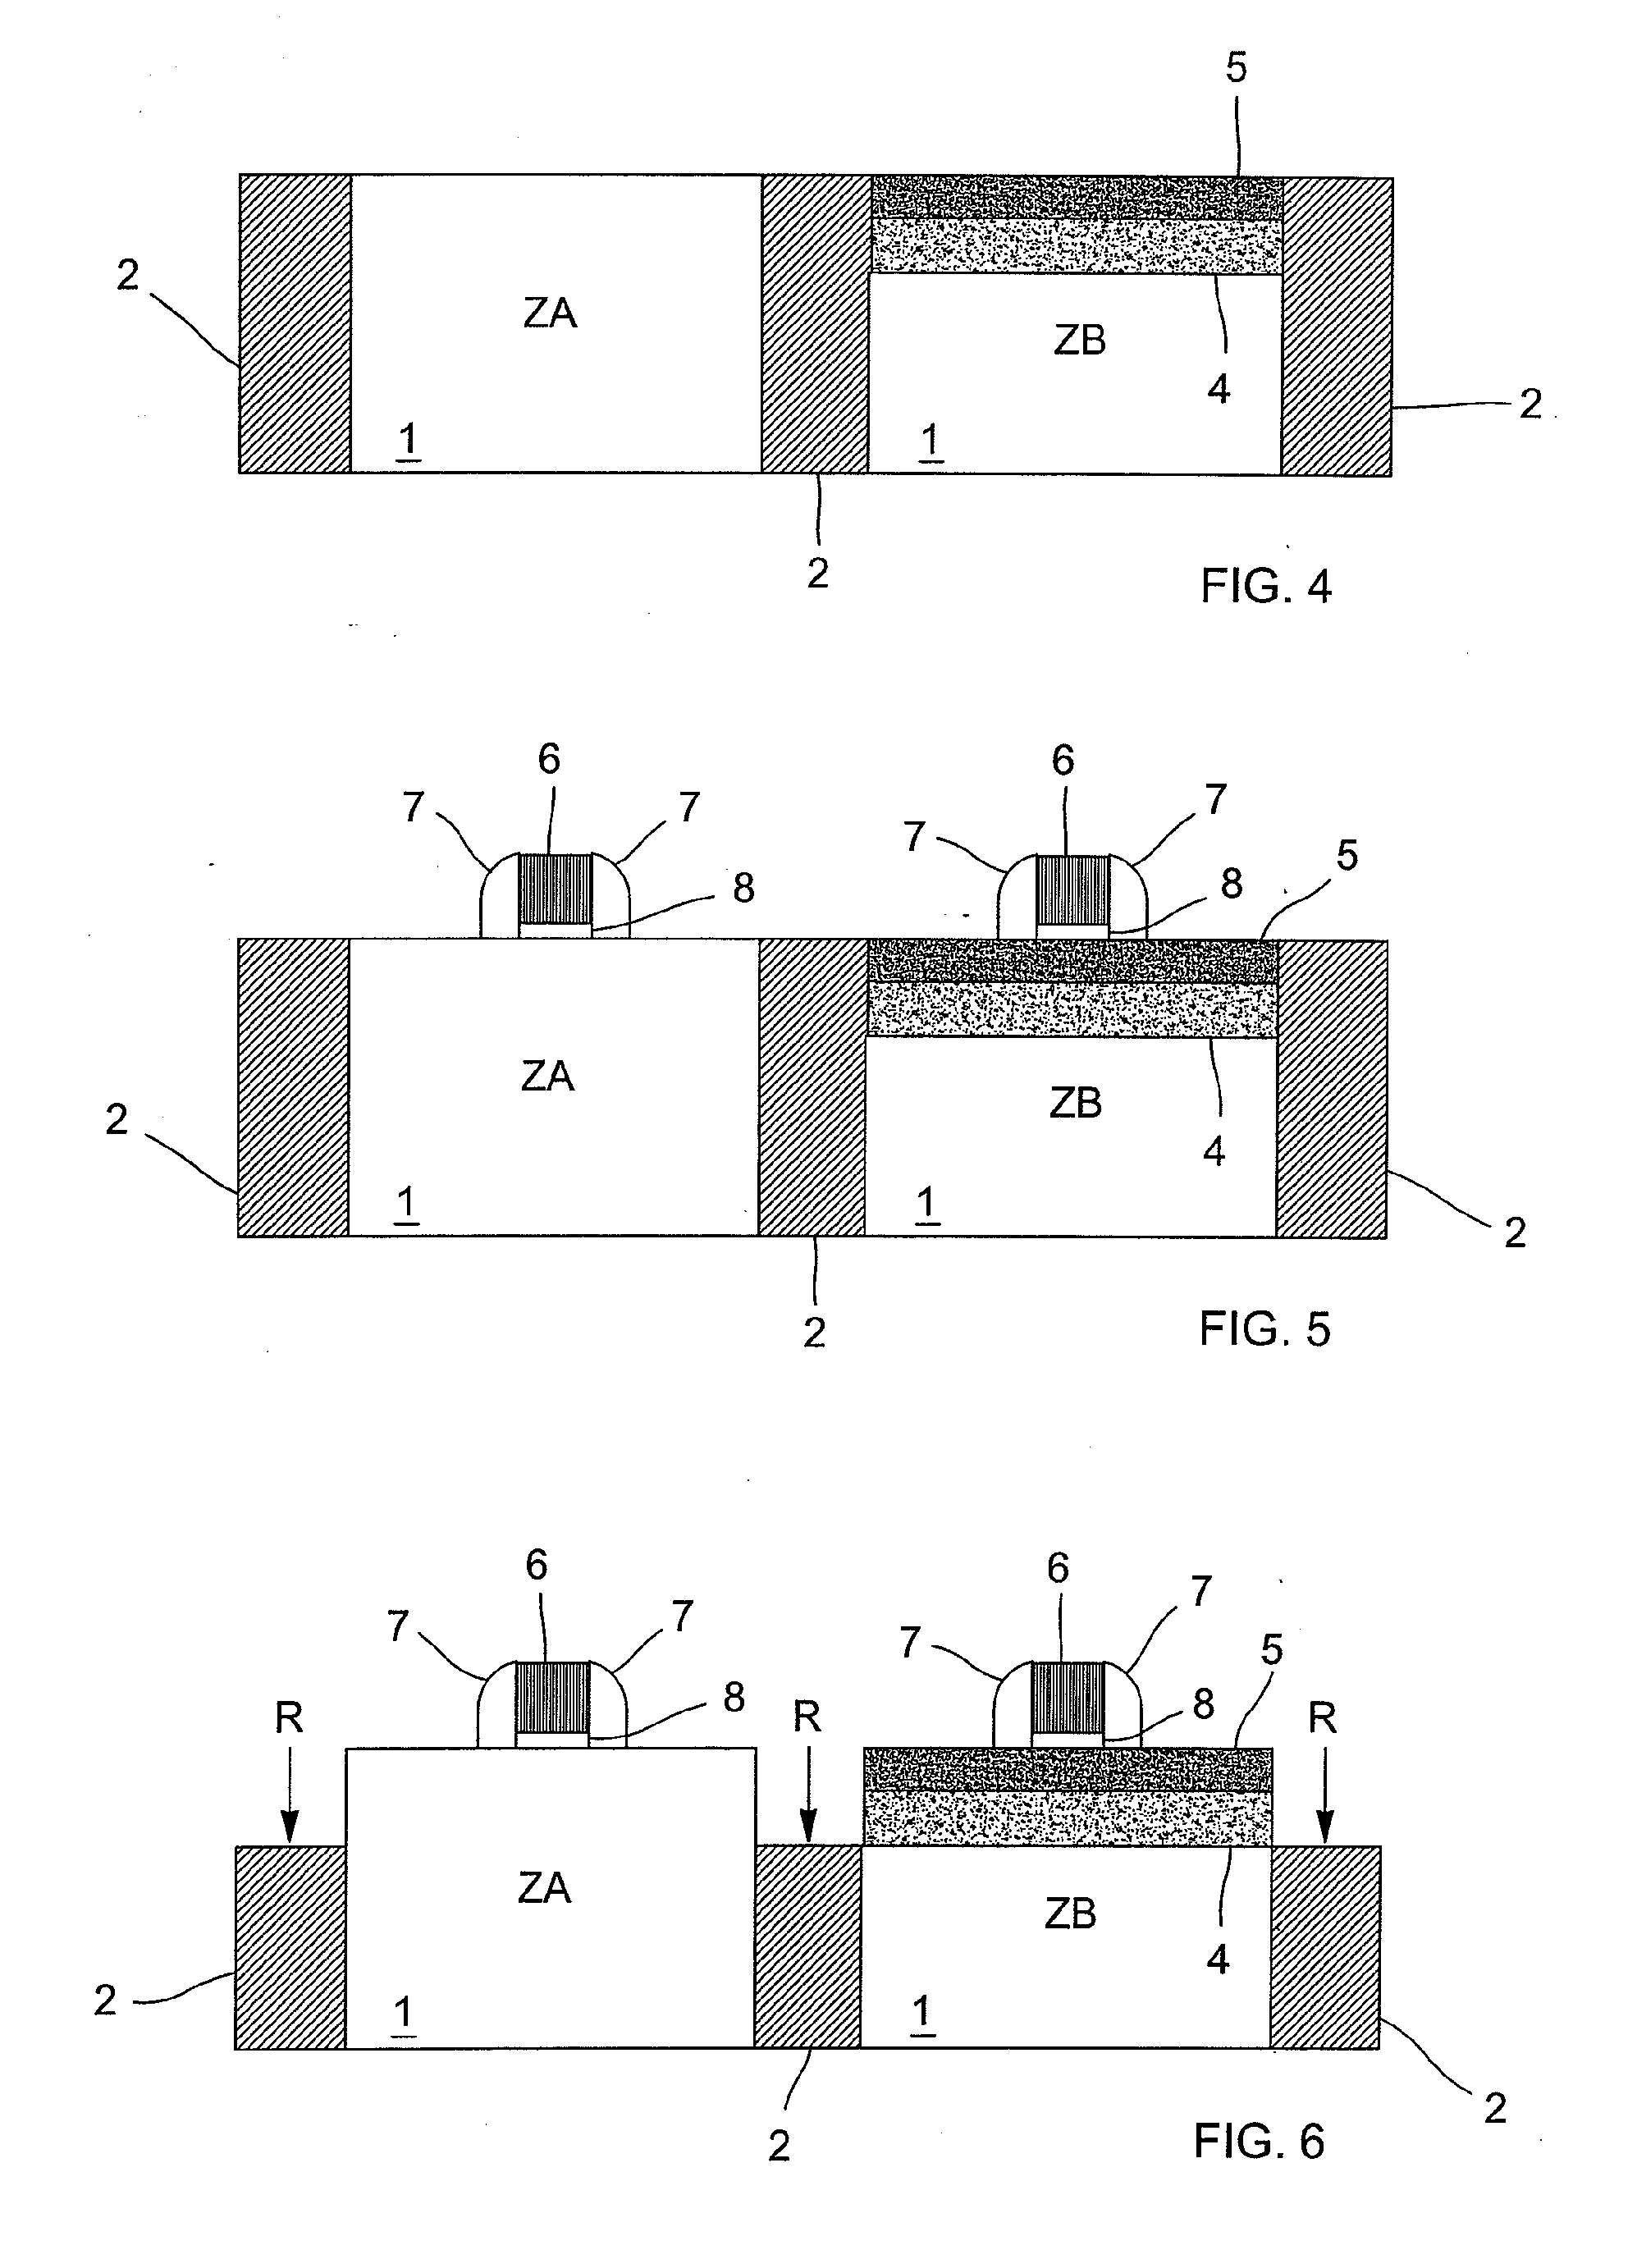 Method for integrating silicon-on-nothing devices with standard CMOS devices